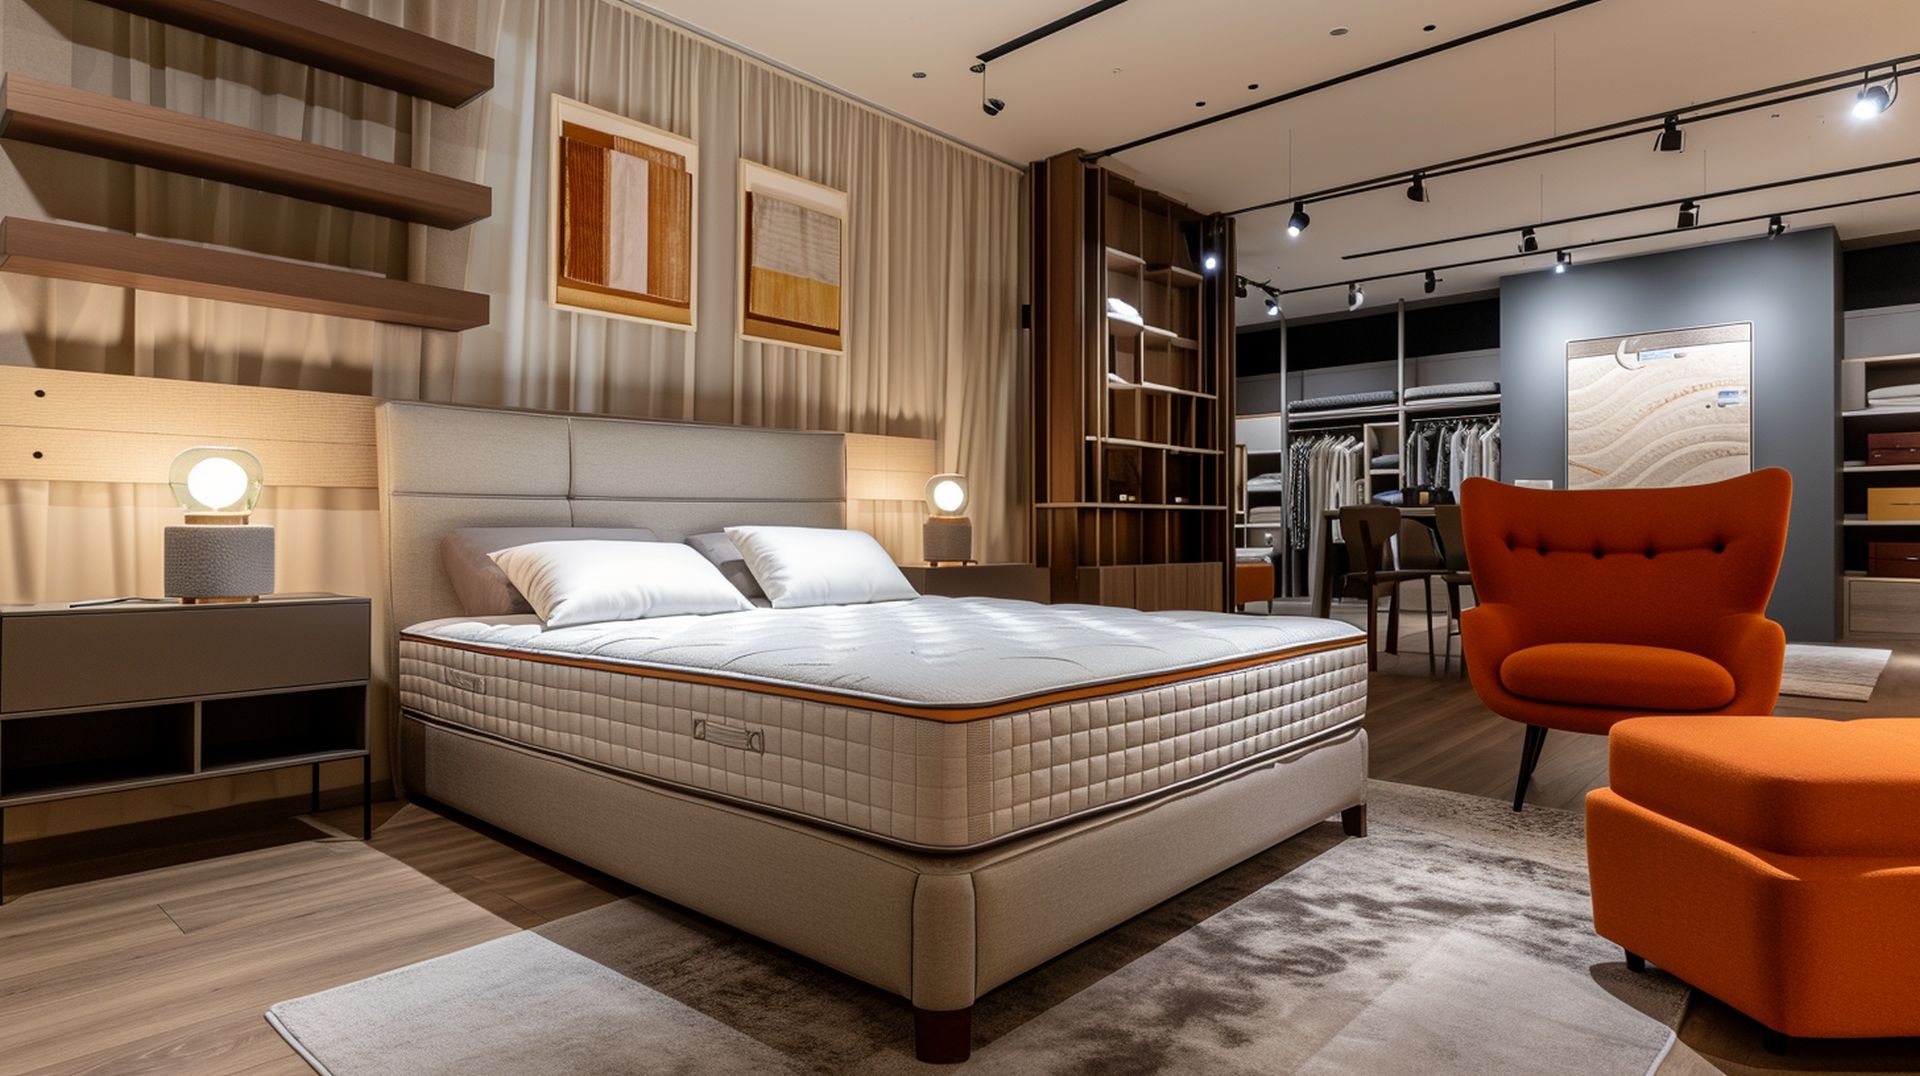 If you're looking for a new bed, mattress stores in Brentwood offer the best customer and delivery service, financing, and warranties in New York